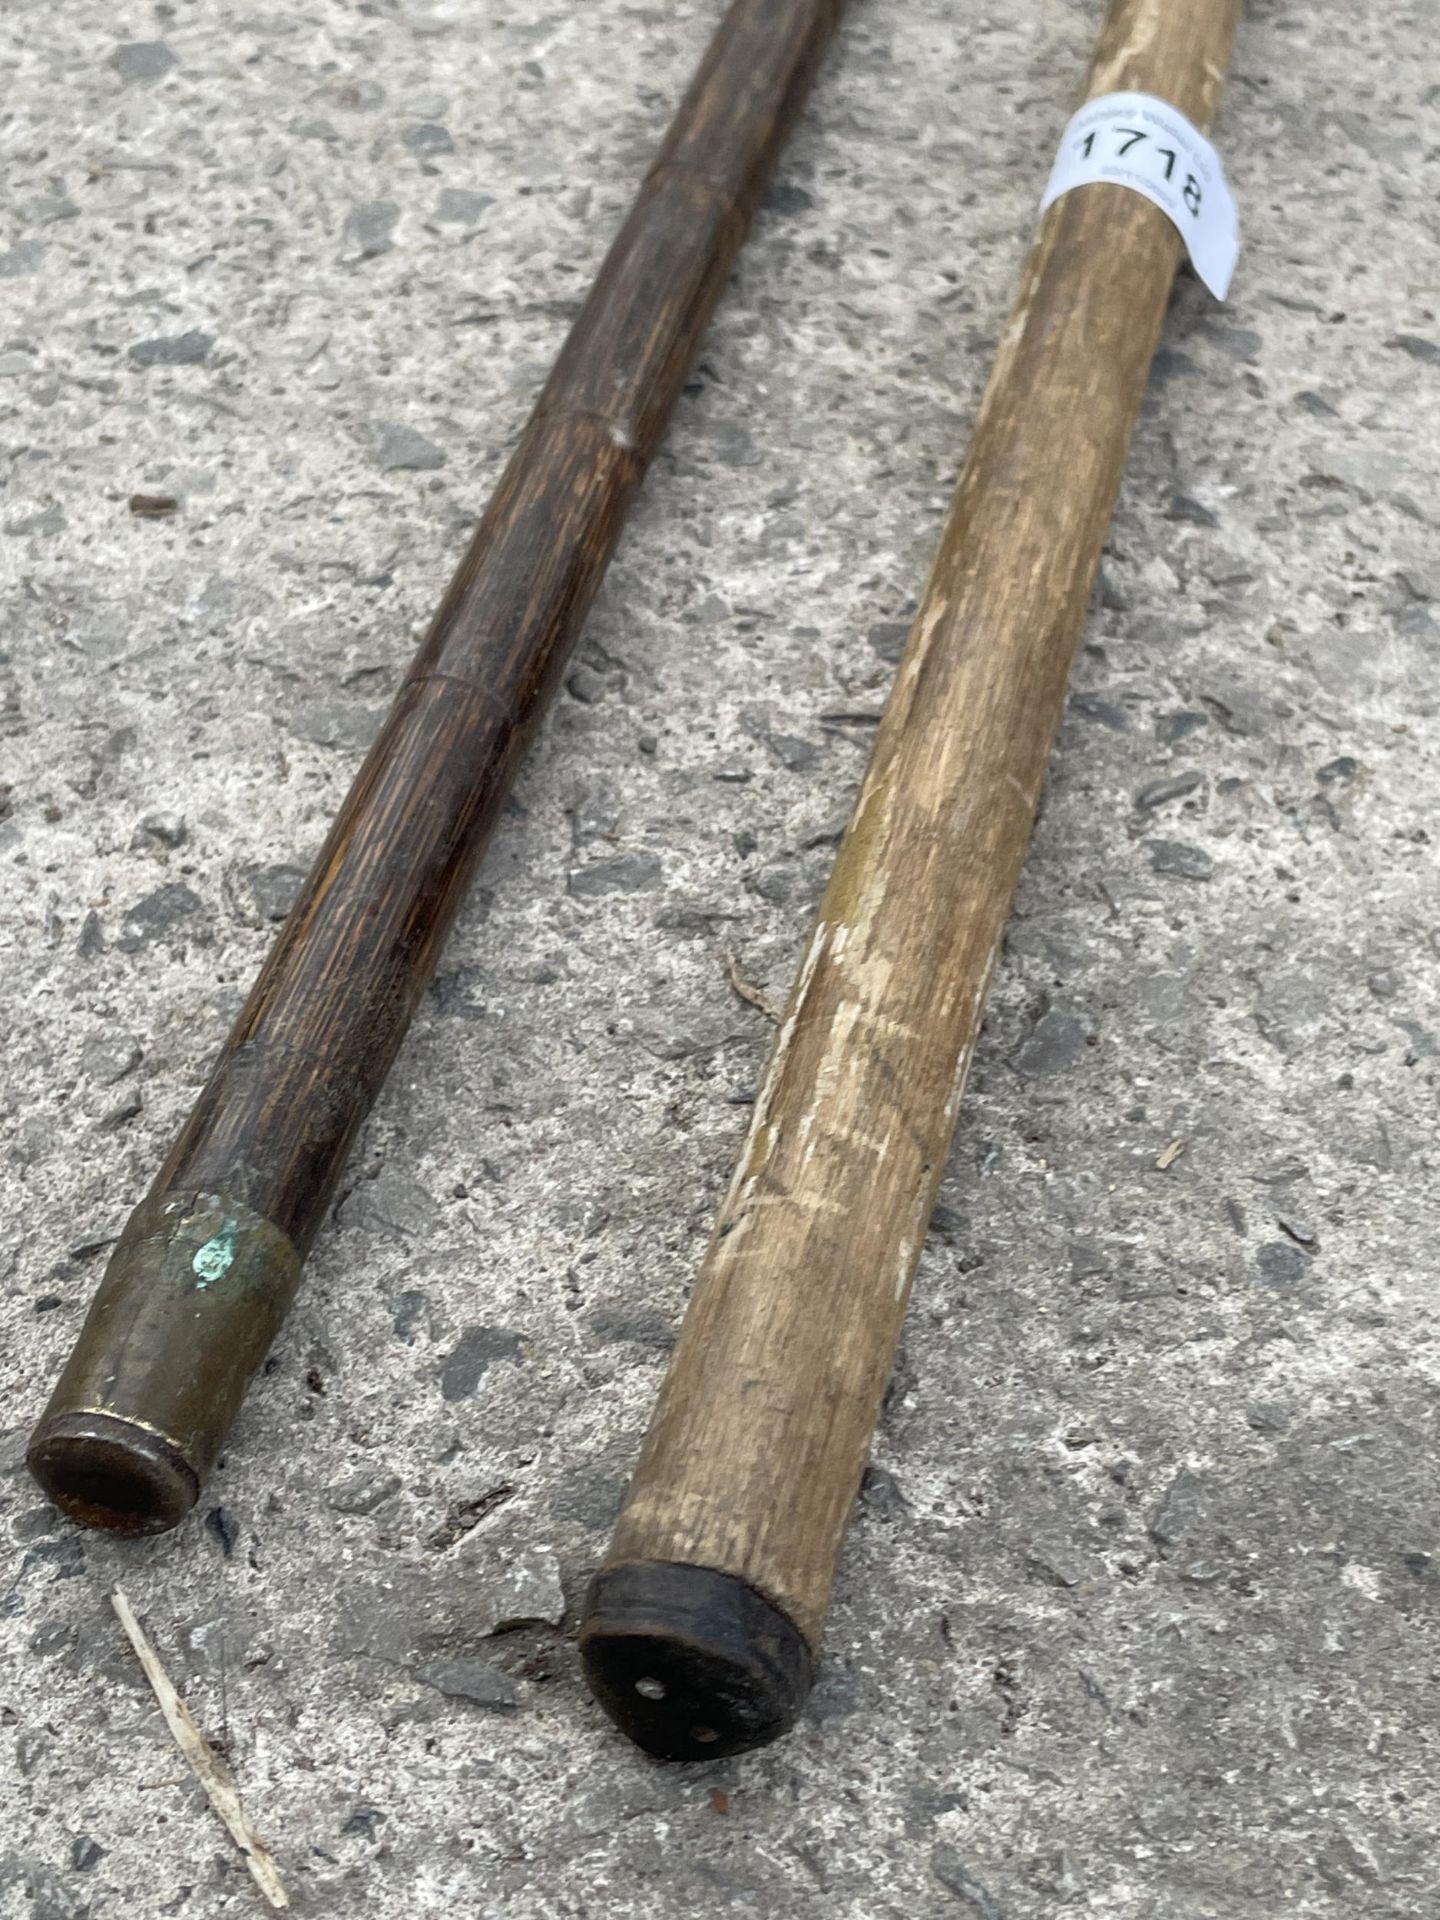 TWO WALKING STICKS, OINE WITH A HALLMARKED SILVER HANDLE AND THE OTHER WITH A HALLMARKED SILVER - Image 3 of 3